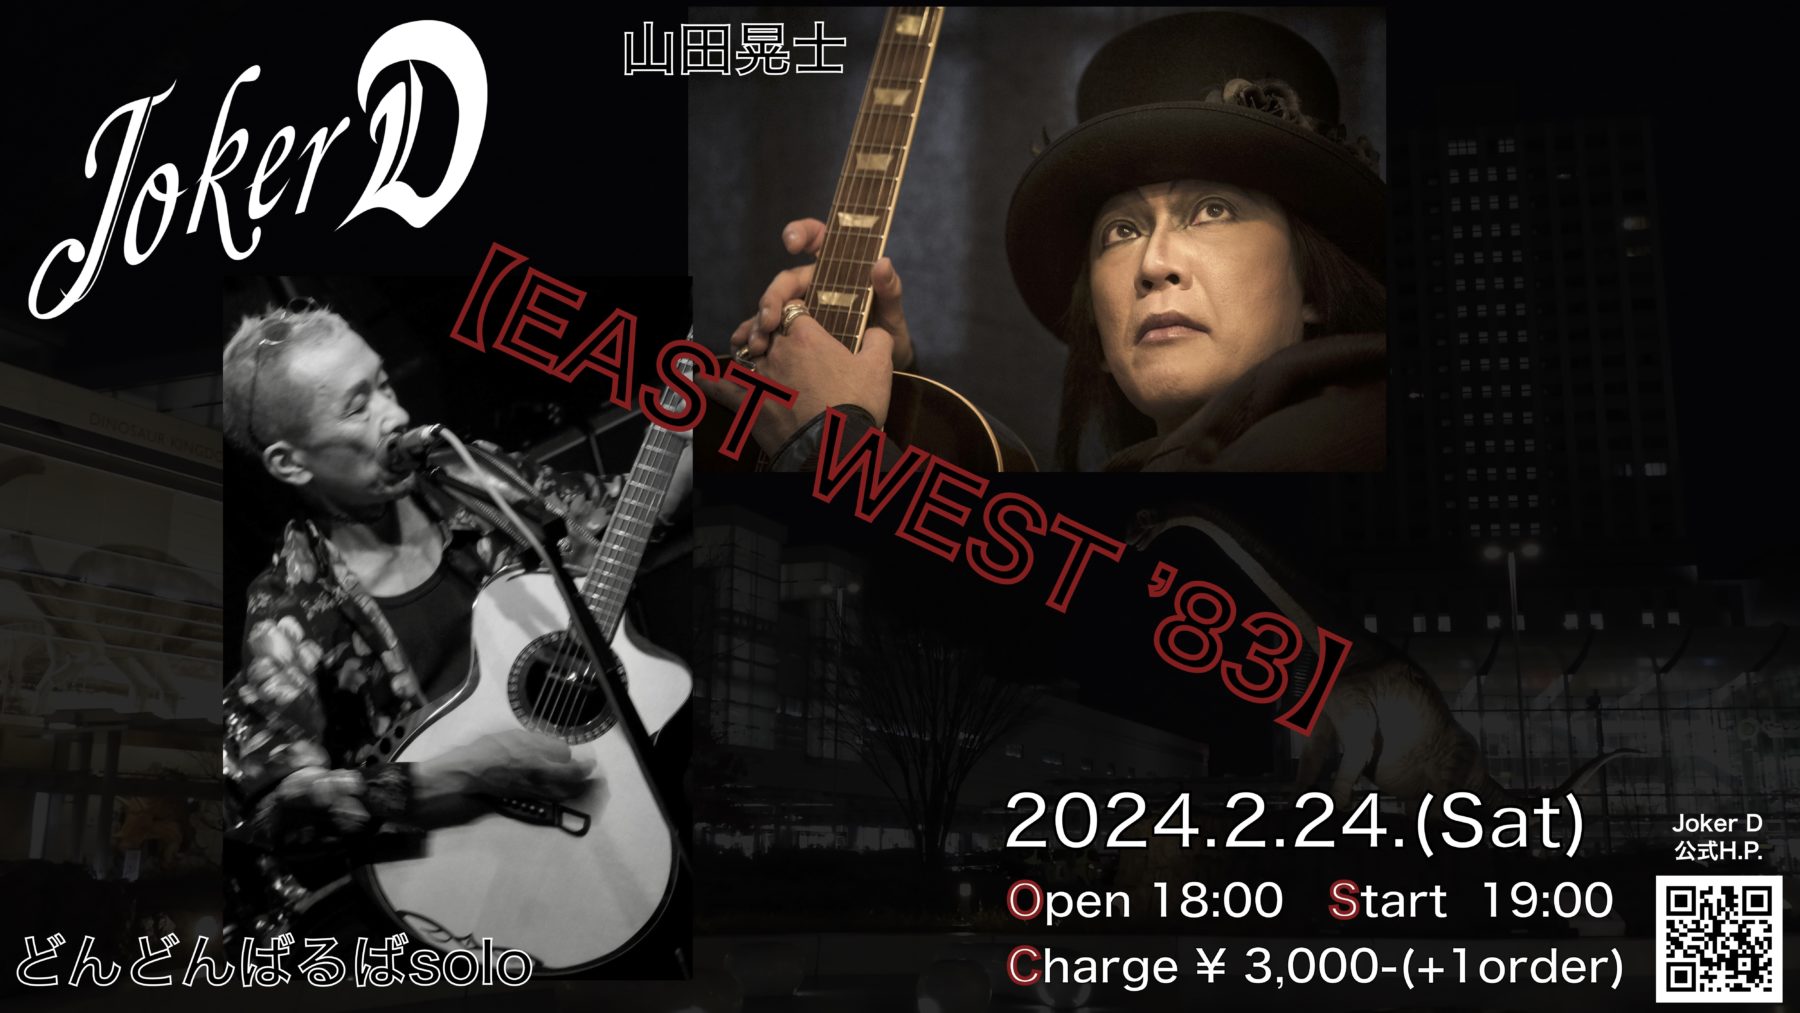 2024.02.24 『EAST WEST ’83』